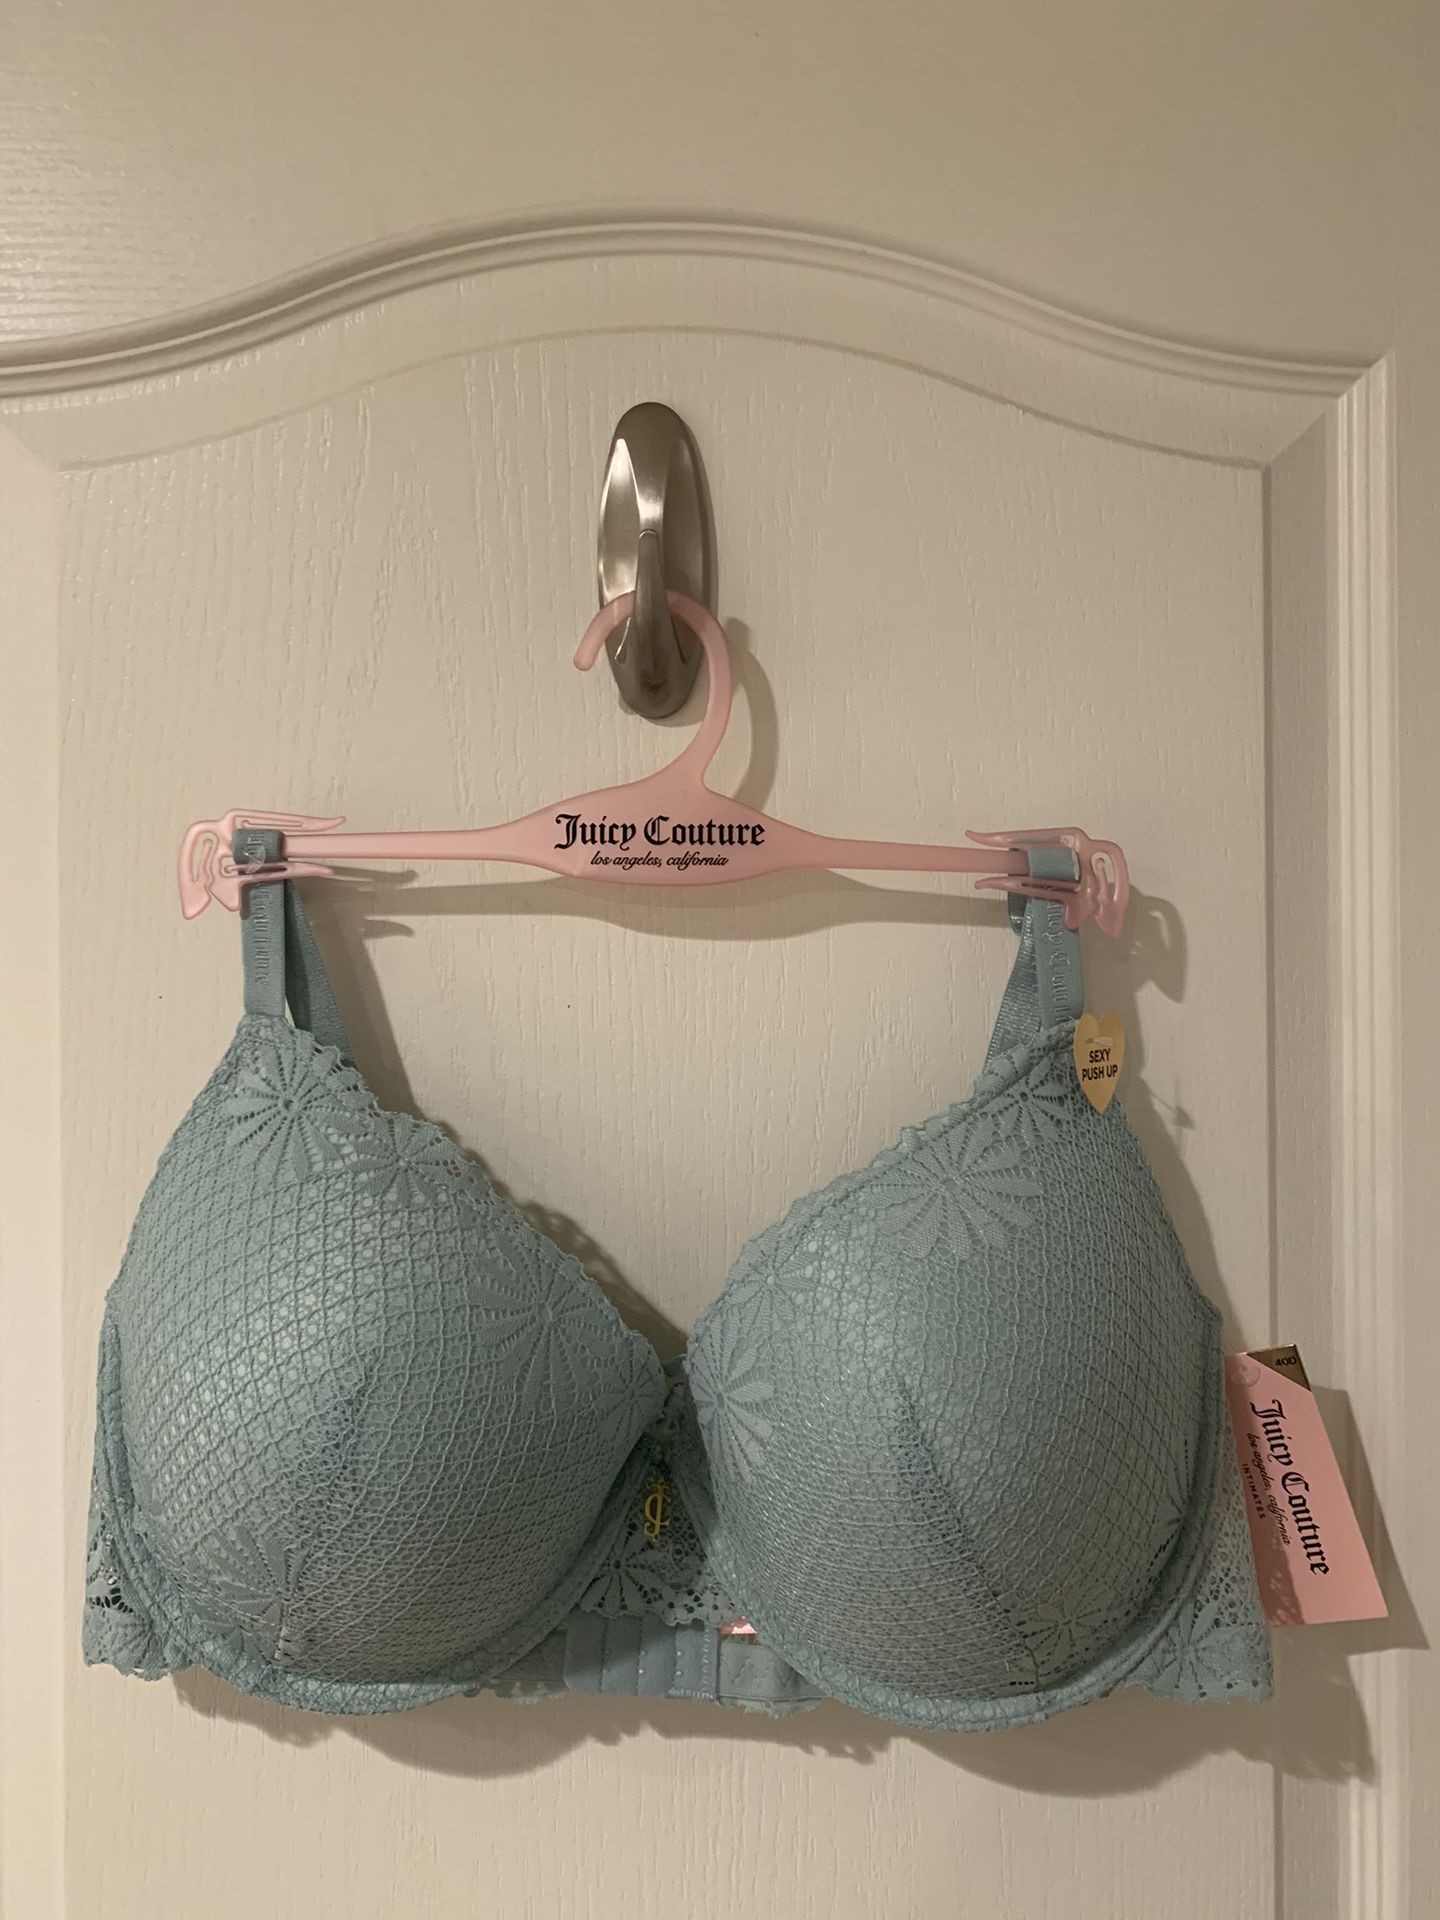 Juicy Couture Lace Push-Up Bra (40D) for Sale in Newark, CA - OfferUp